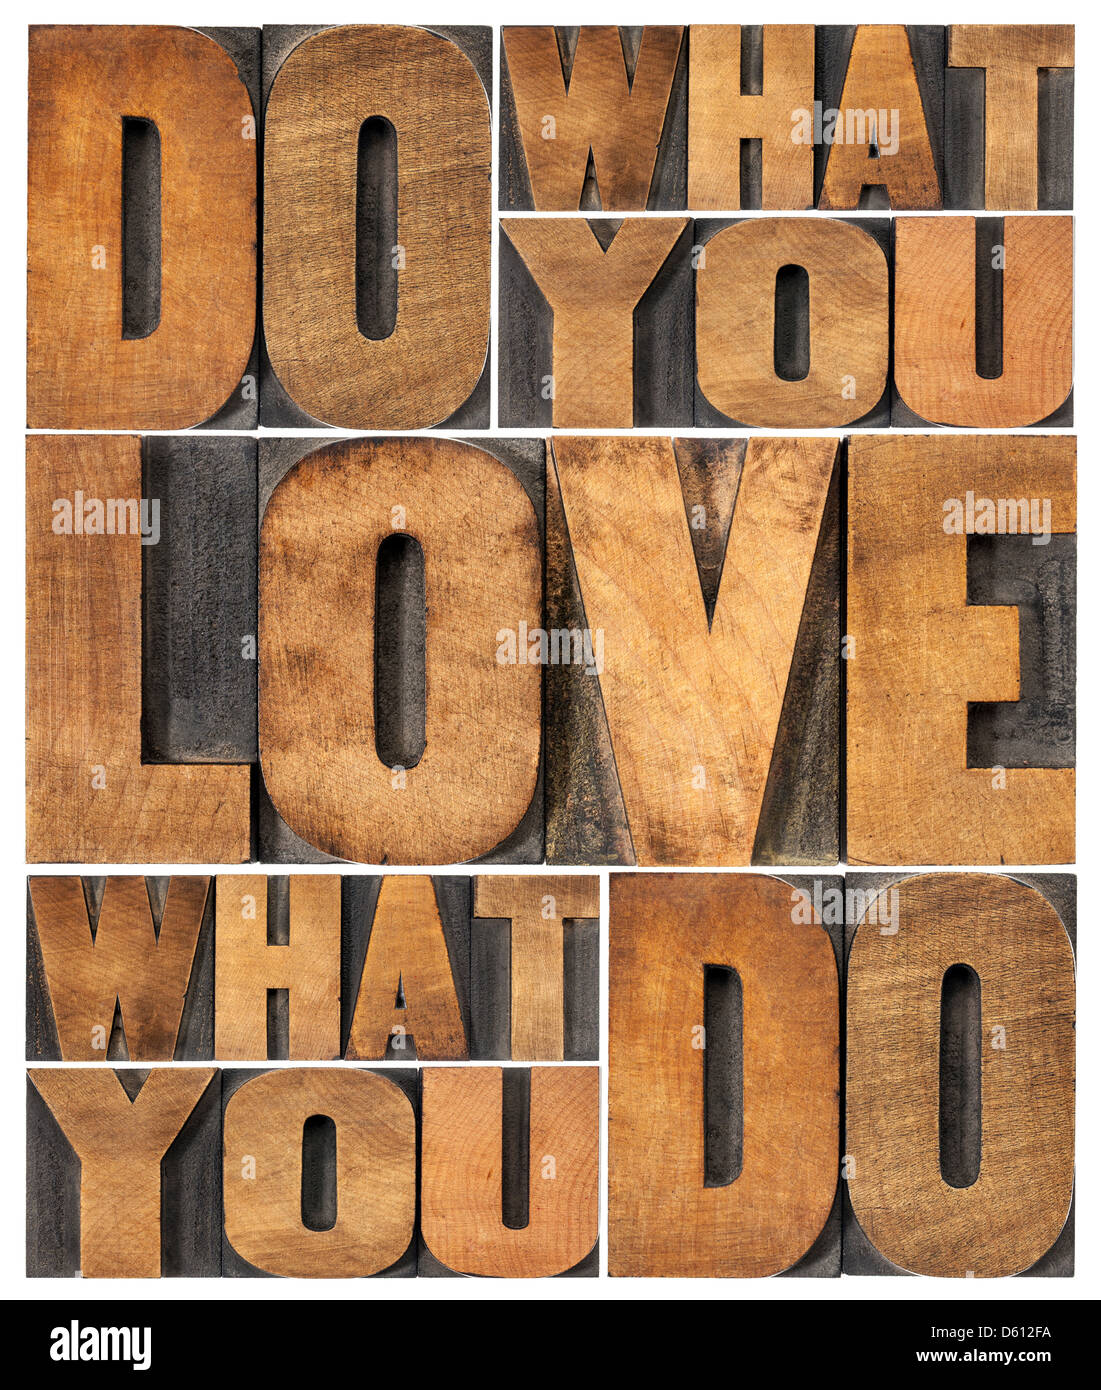 do what you love, love what you do - motivational word abstract in vintage letterpress wood type printing blocks Stock Photo